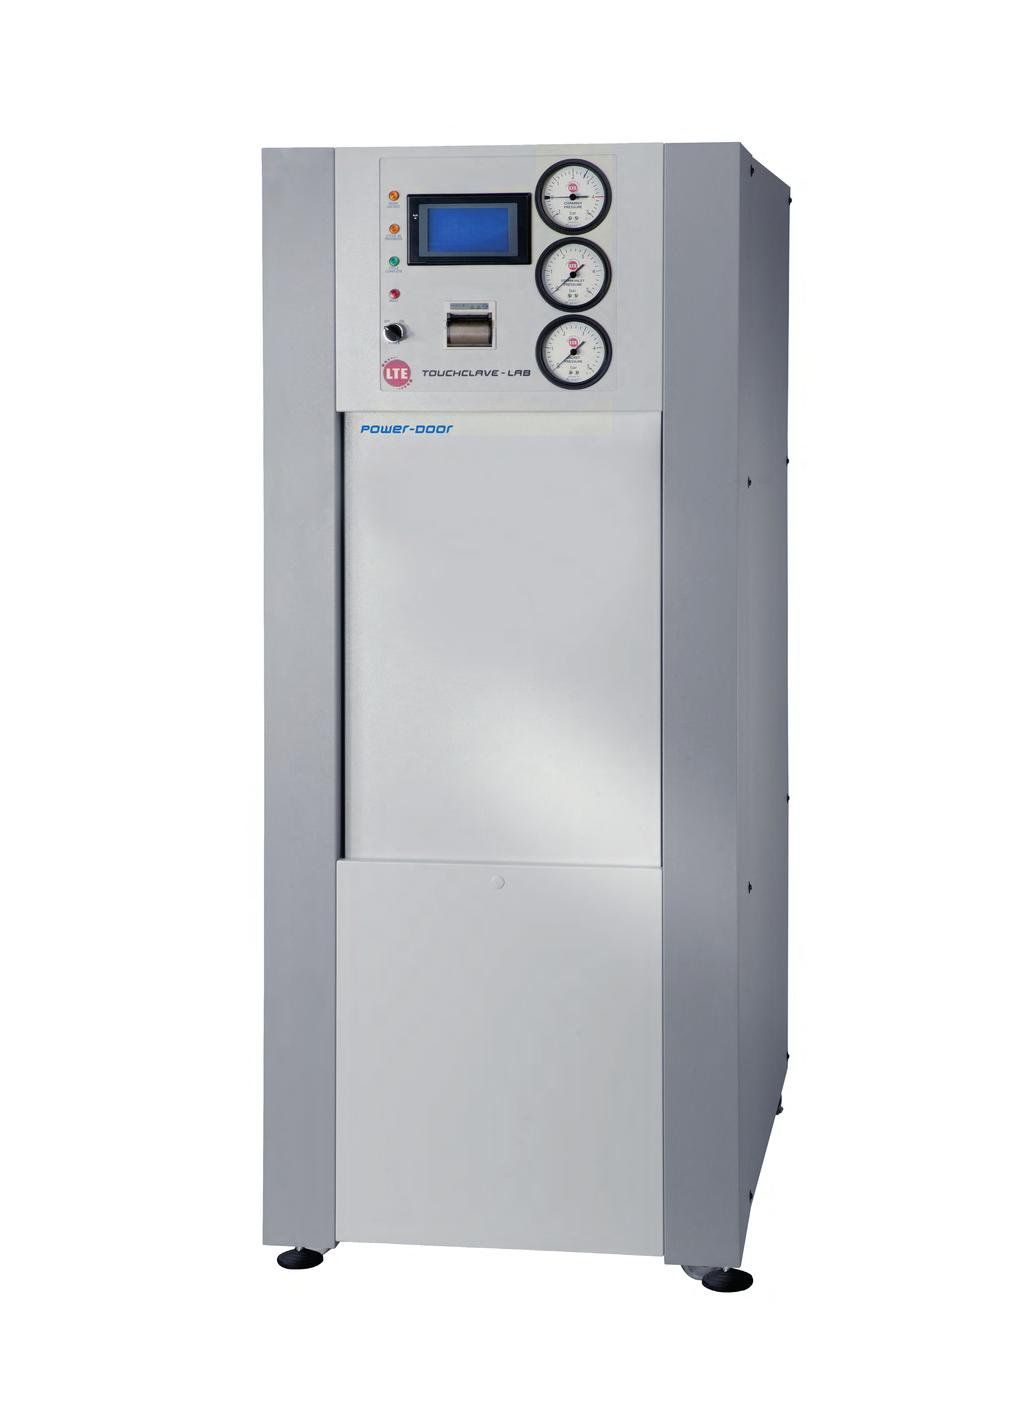 Popular Options Explained Control System When choosing your autoclave, careful consideration needs to be given to the options you may need in order to optimise the autoclave s performance and safety.